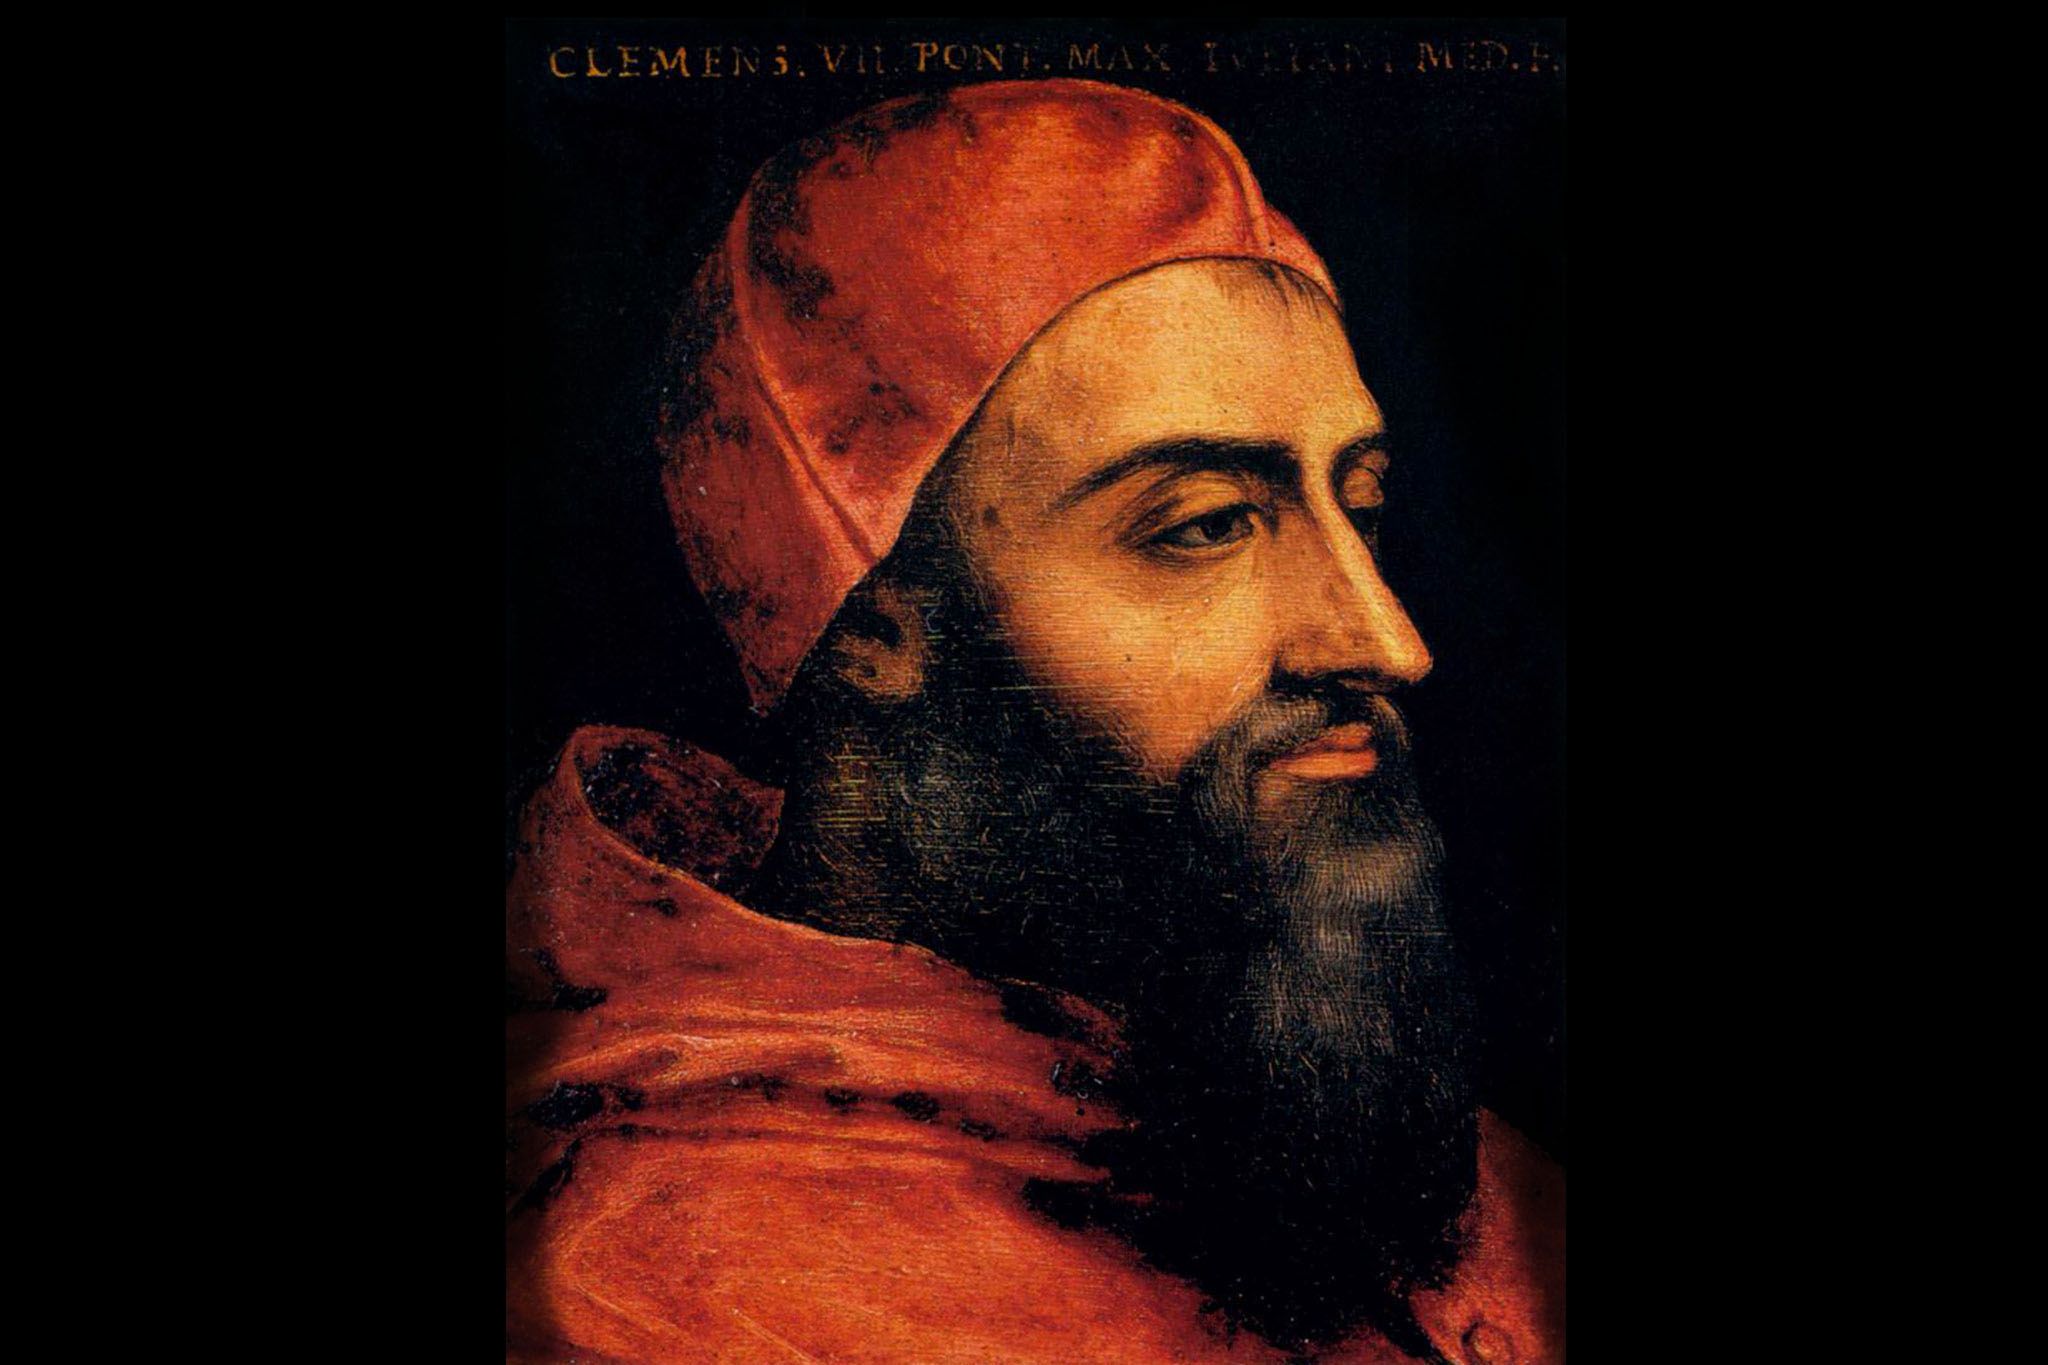 Clement VII, christened Giulio de’ Medici, was born May 26, 1478 in Florence and died in Rome, Sept. 25, 1534. 